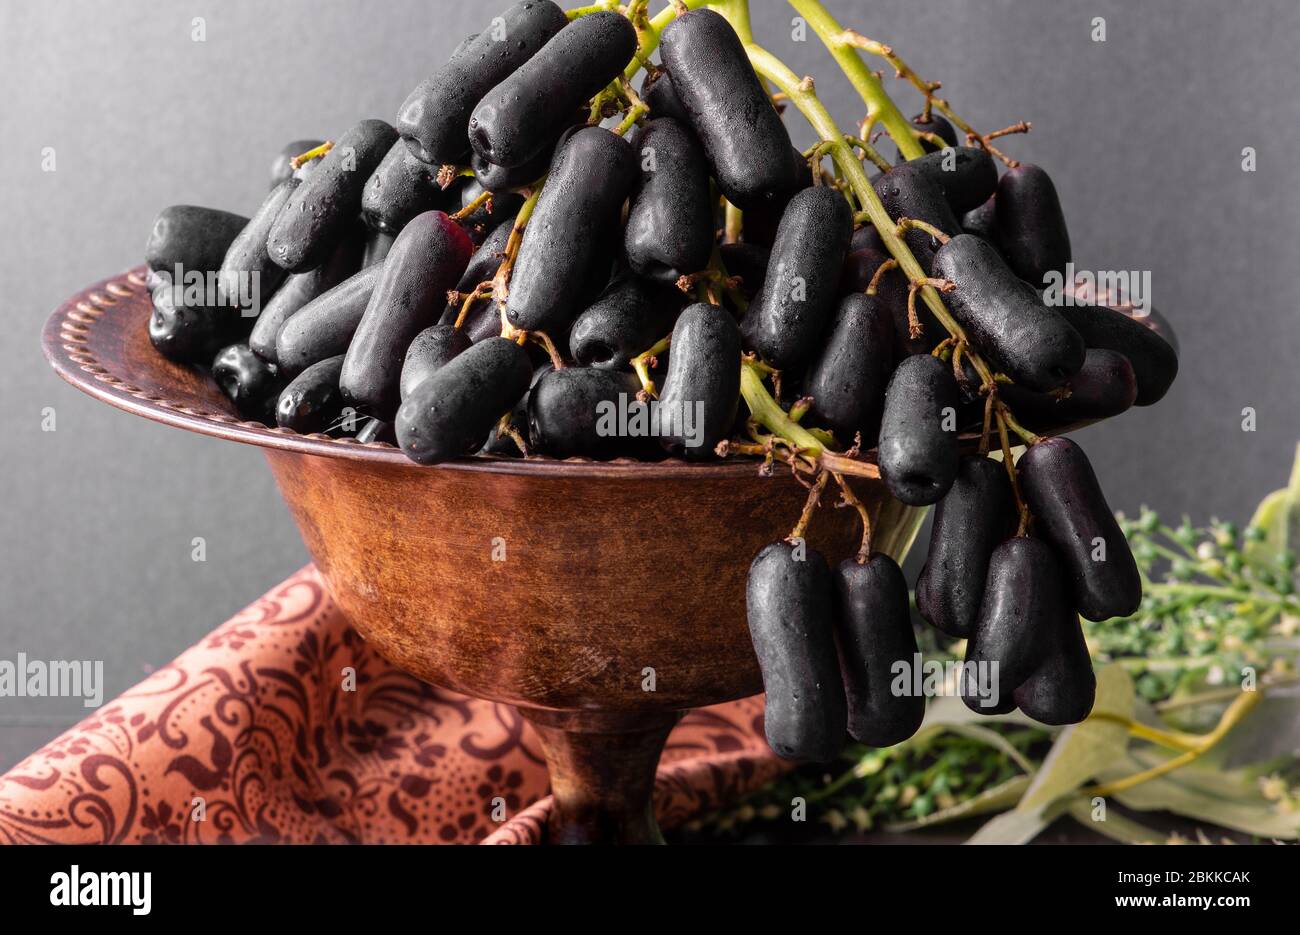 Sweet Saphire Grapes grown in California are a new exciting variety that is crisp and has an unual long shape like a finger. Stock Photo